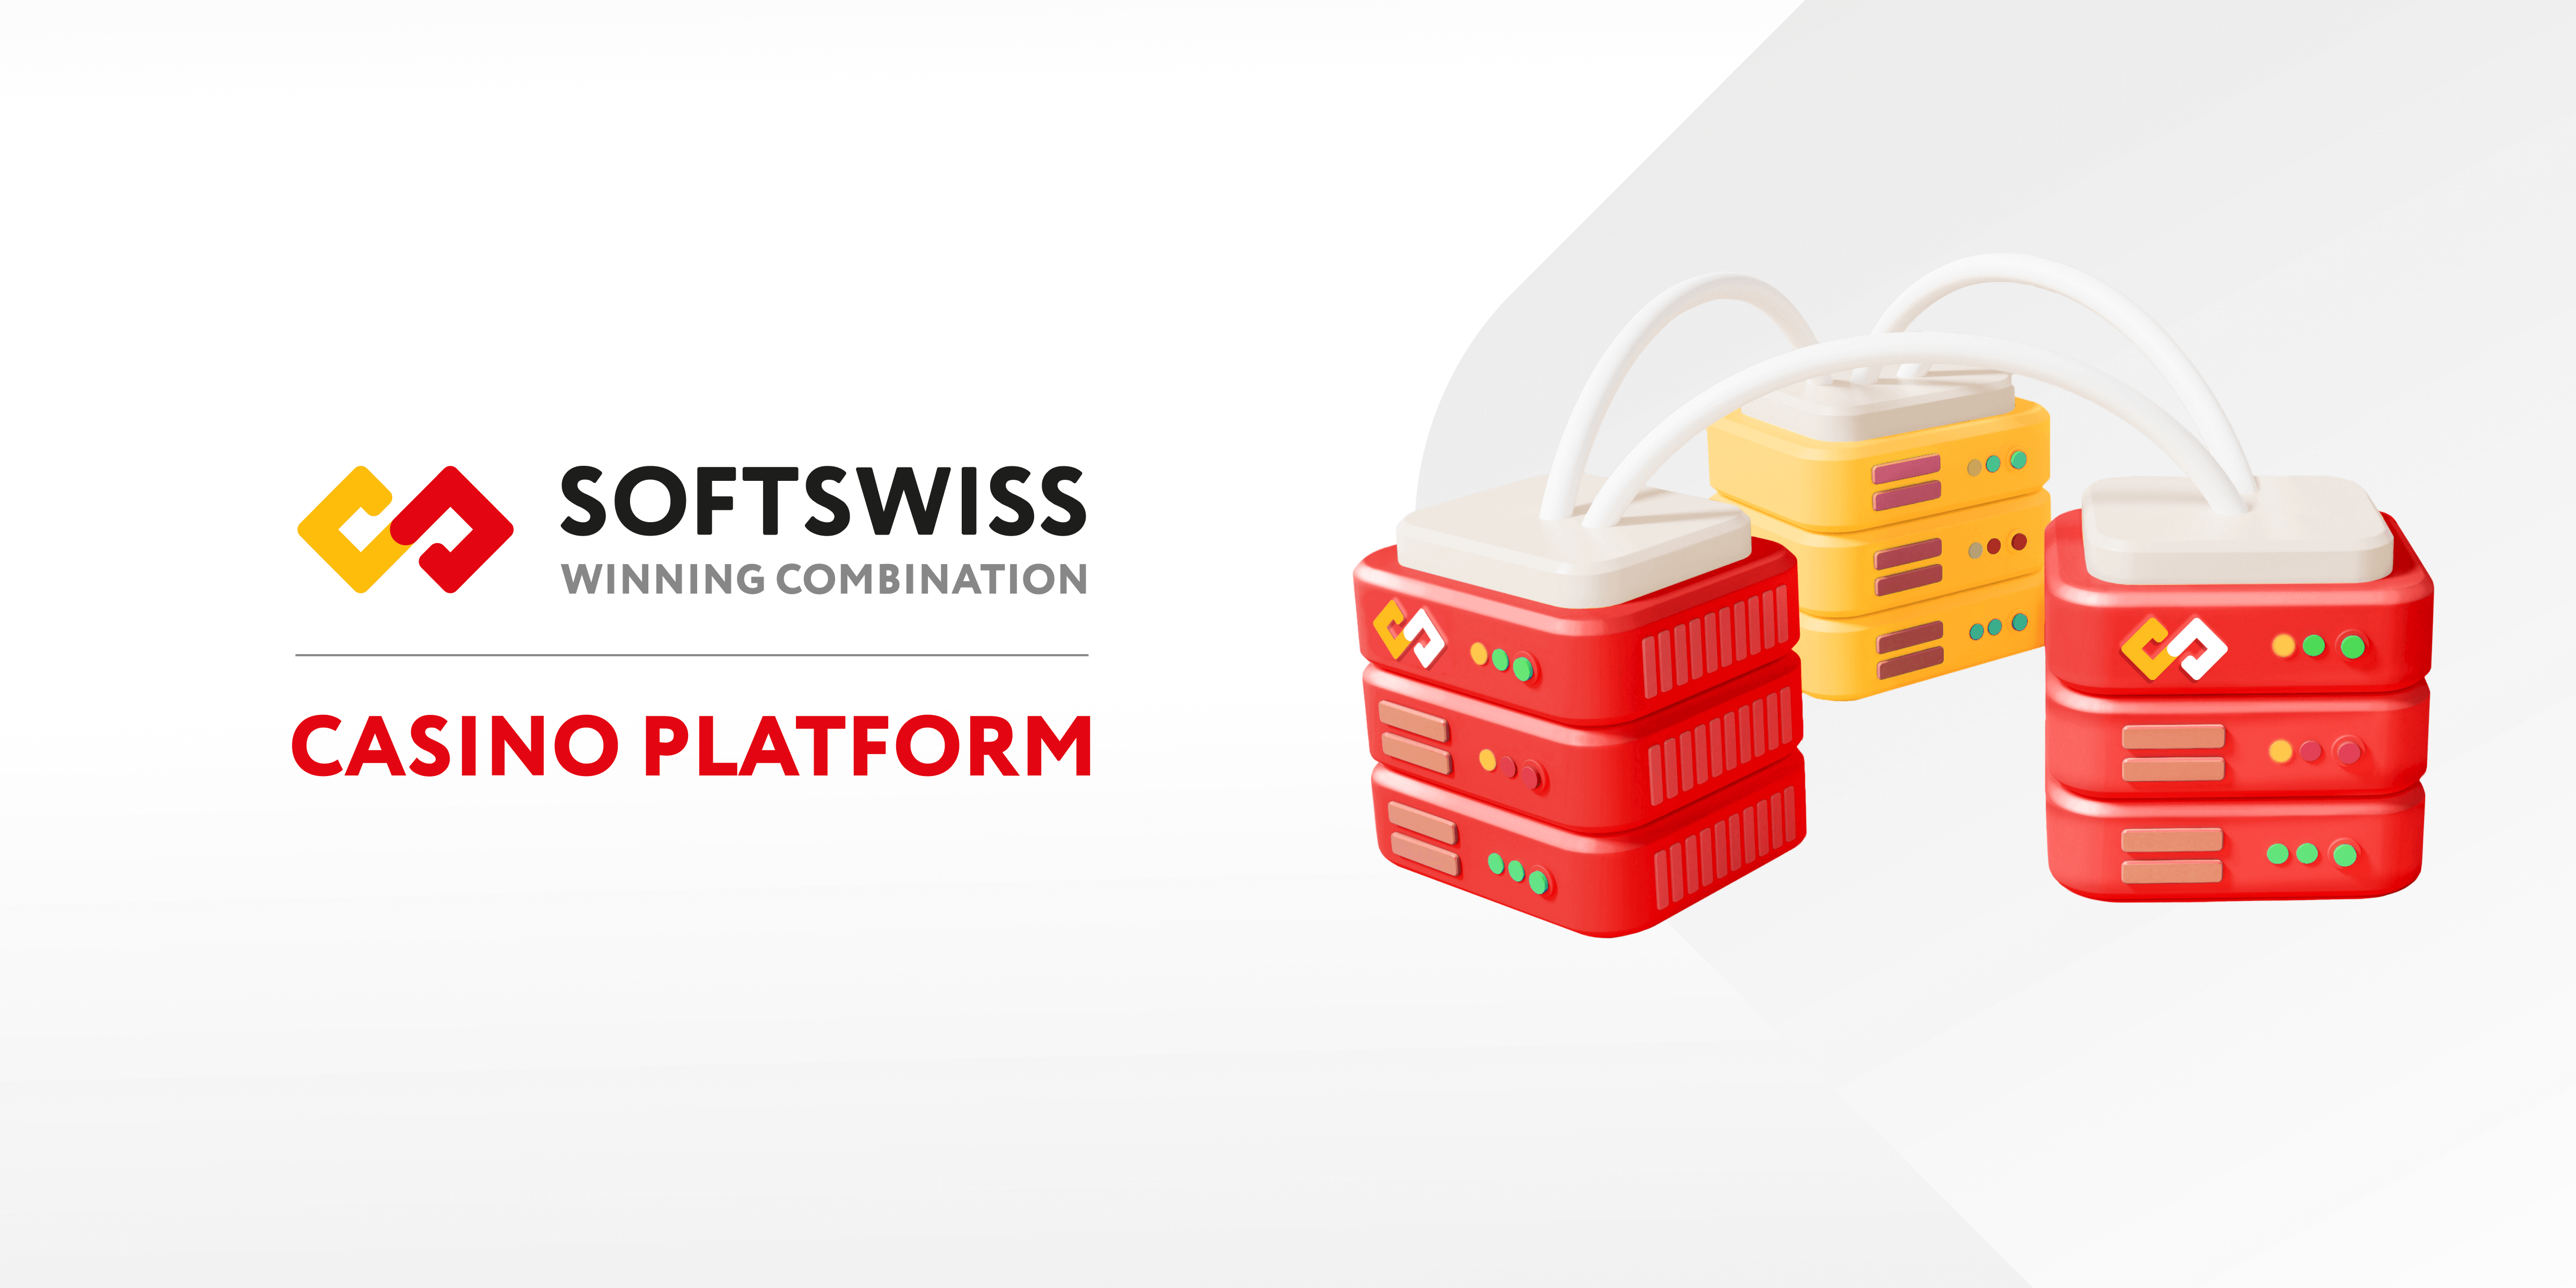 Five Hours to Migrate Million Players: SOFTSWISS case